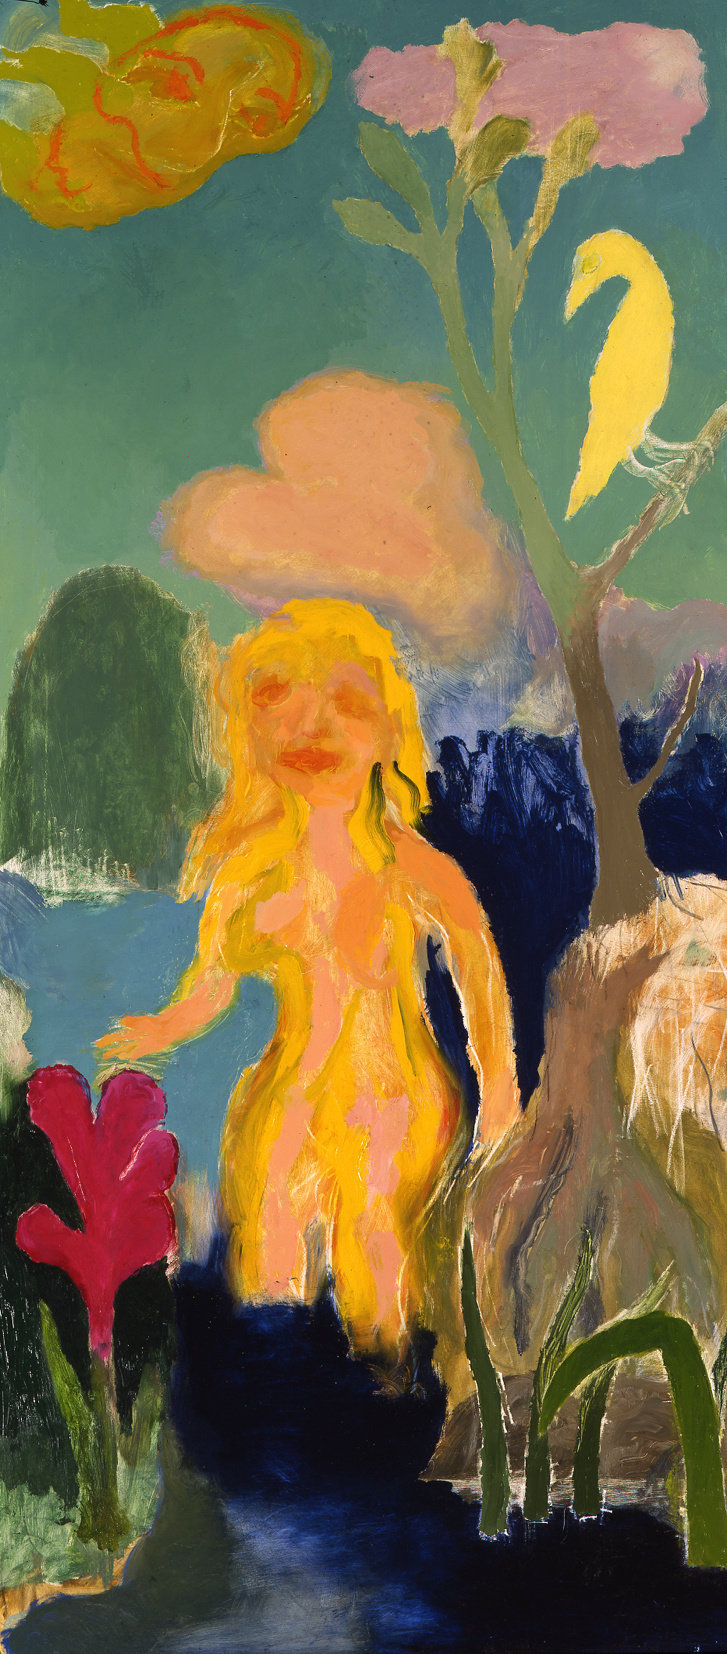 Kiff, woman standing in sea with crimson, flowers and pale yellow bird, 1991, oil on board